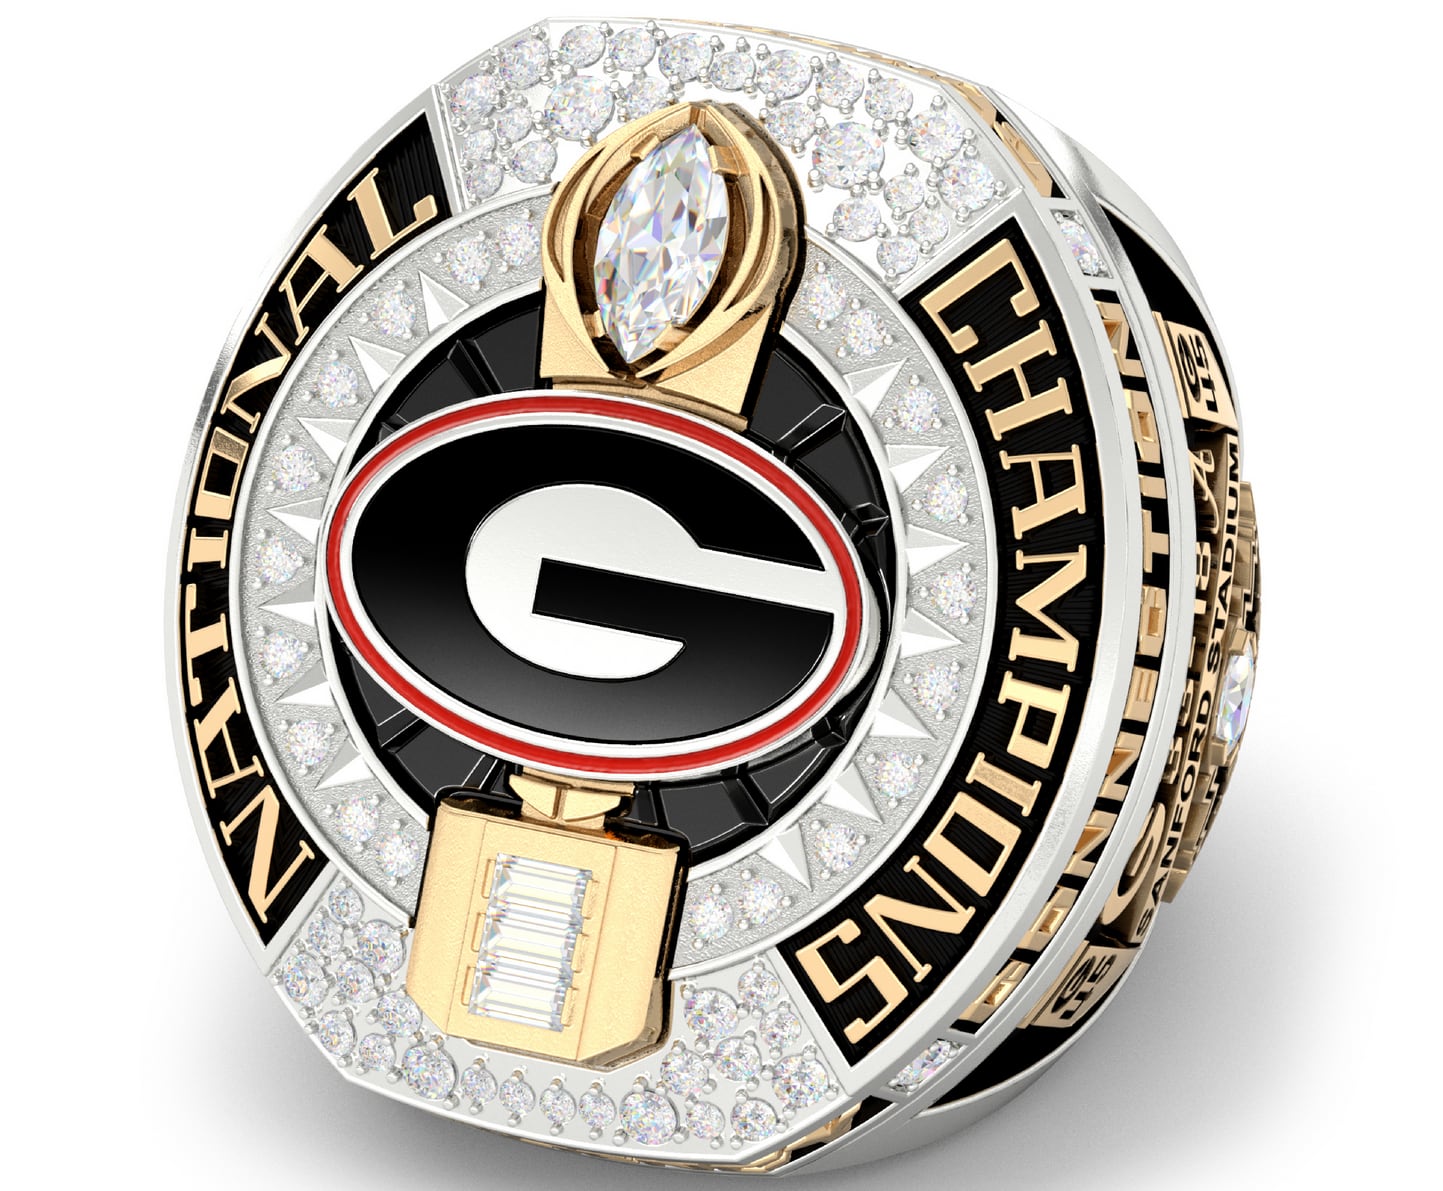 In Photos: 2021 Championship Ring Photo Gallery